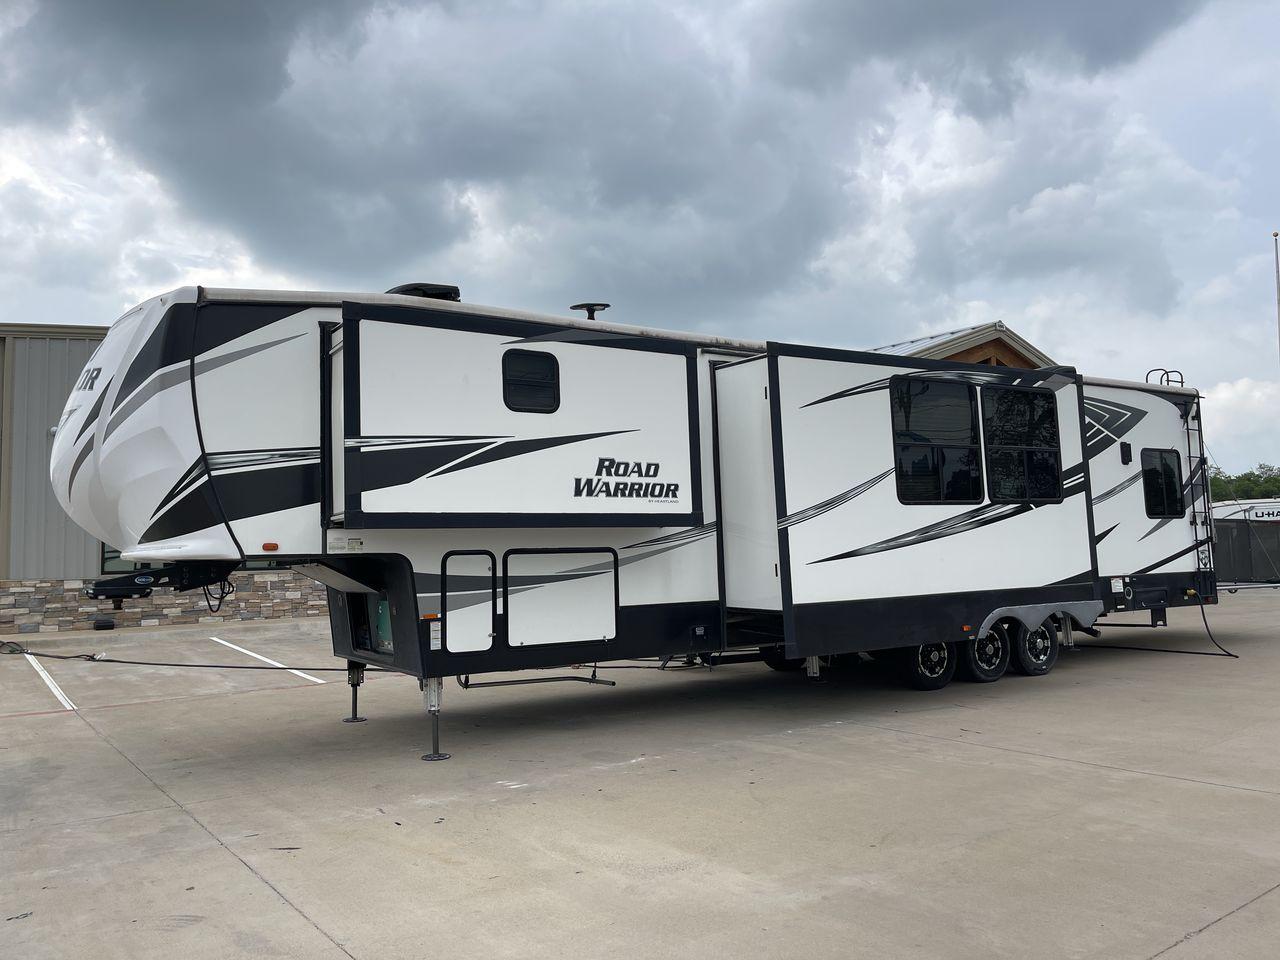 2019 HEARTLAND ROAD WARRIOR 427RW (5SFCG4435KE) , Length: 44.08 ft. | Dry Weight: 16,400 lbs. | Gross Weight: 20,000 lbs. | Slides: 2 transmission, located at 4319 N Main Street, Cleburne, TX, 76033, (817) 221-0660, 32.435829, -97.384178 - The 2019 Heartland Road Warrior 427RW fifth wheel toy hauler is ready for your next journey. The length of this amazing RV is 44.08 feet, its dry weight is 16,400 lbs and its gross weight is 20,000 lbs. This makes it stable and long-lasting on the road. This RV is strong and stylish, with two slides - Photo #30